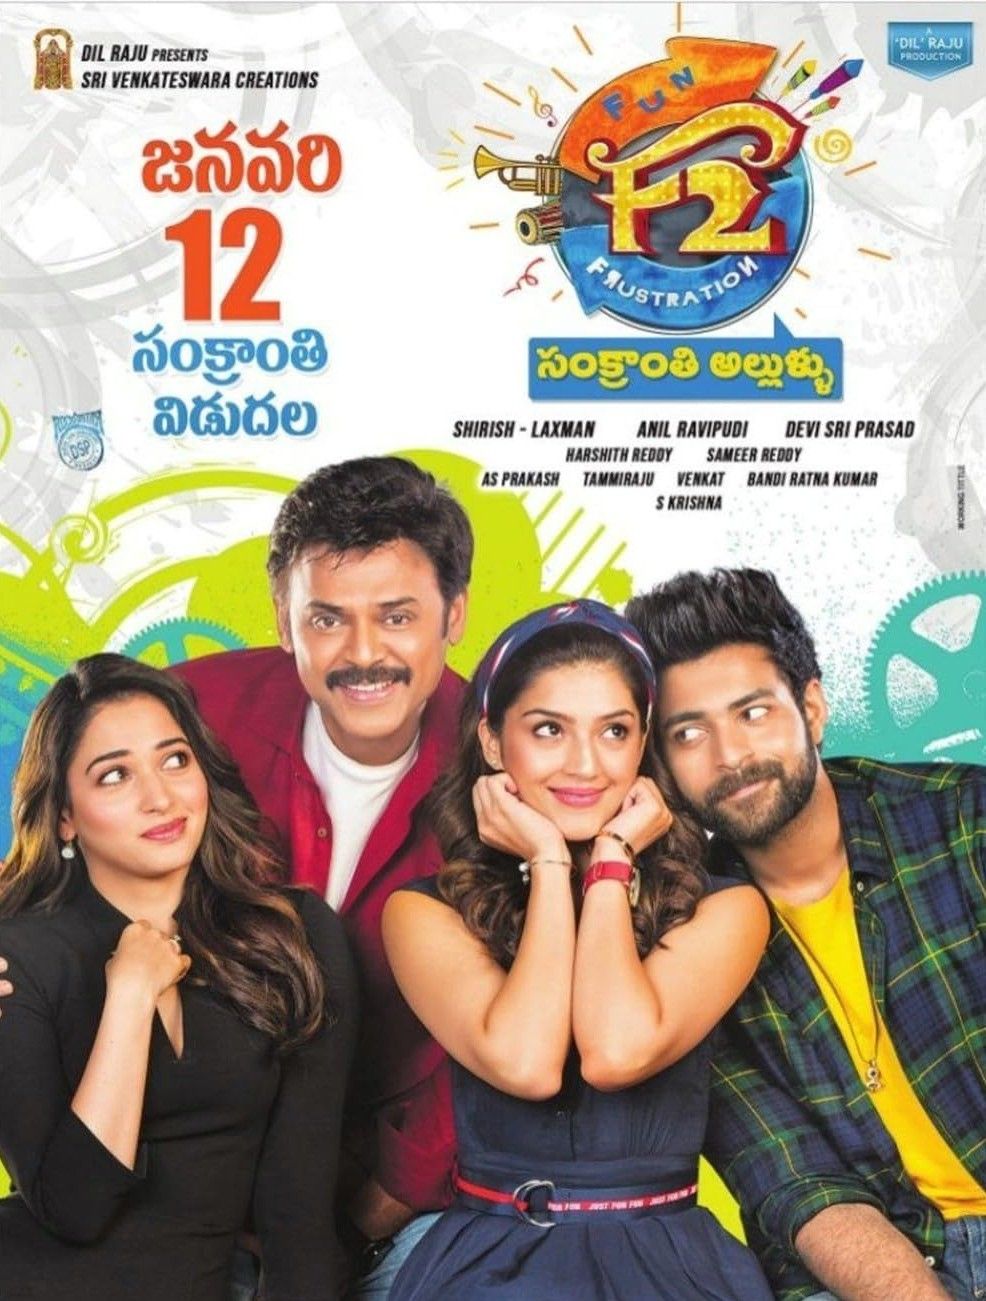 F2 Fun and Frustration (2019) Hindi ORG Dubbed HDRip download full movie